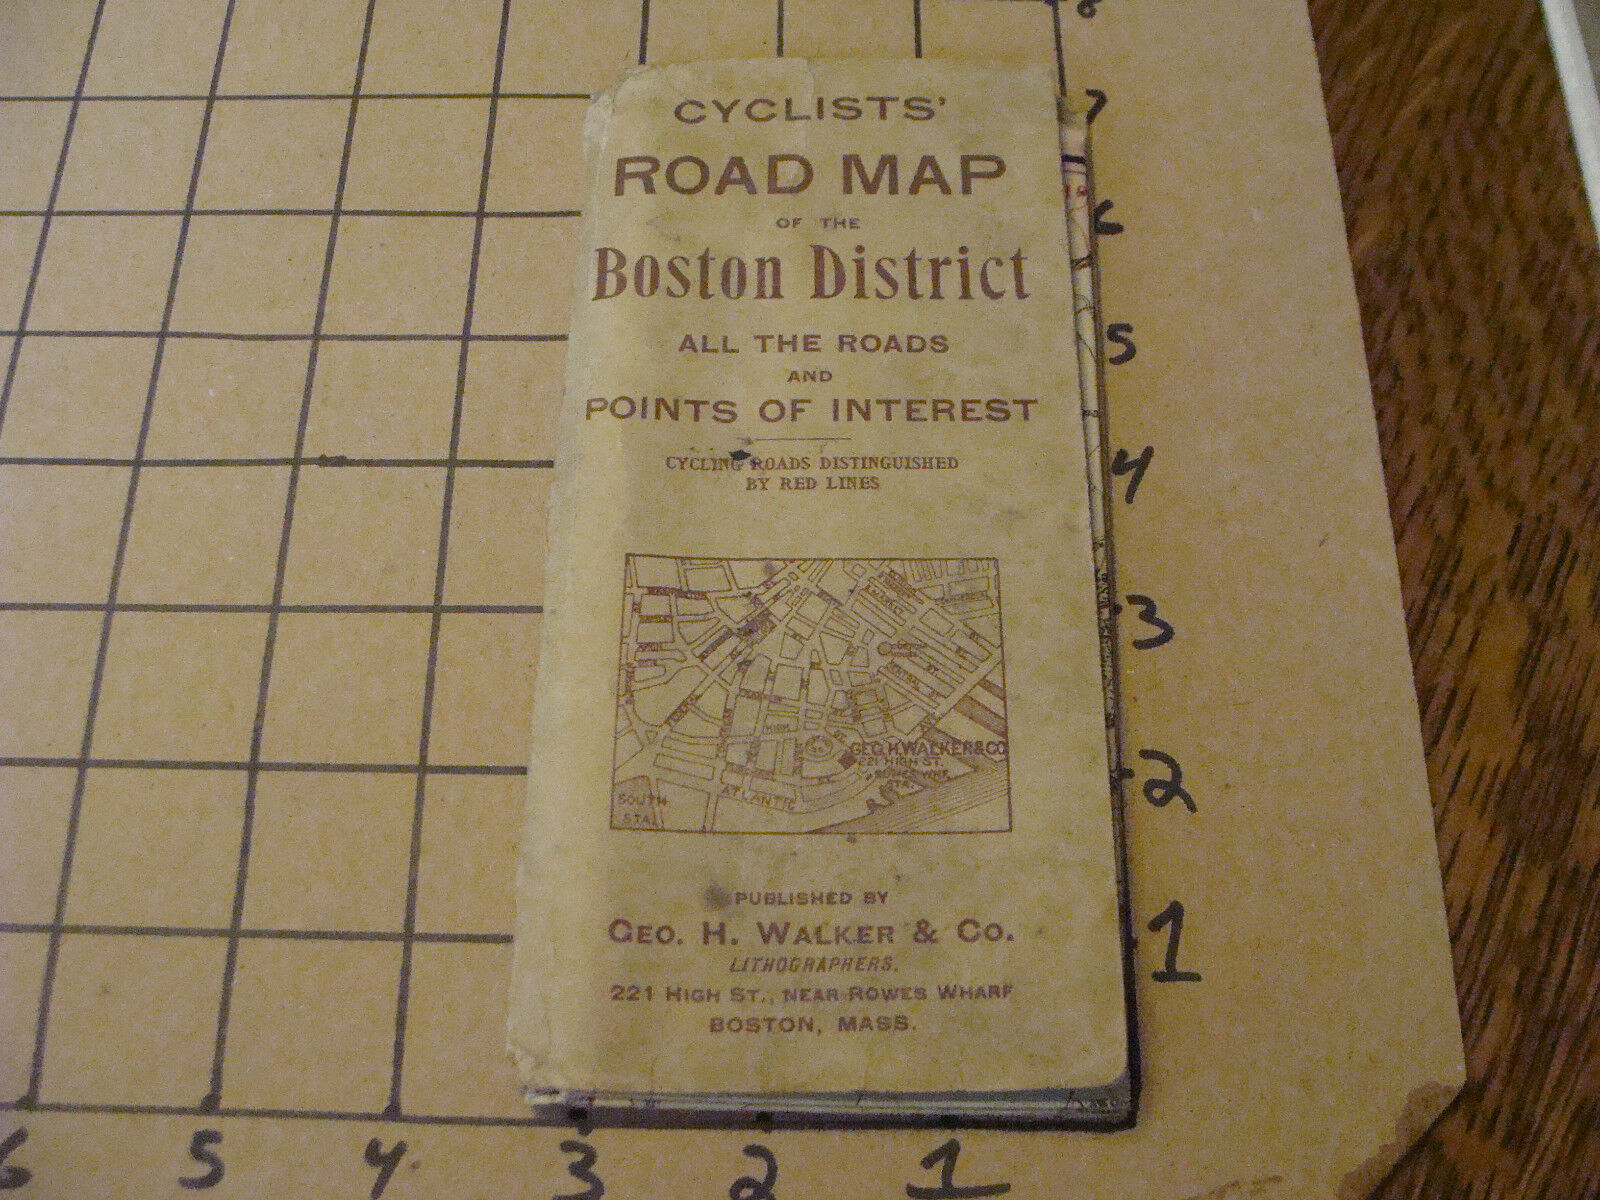 ORIGINAL 1905 CYCLISTS' ROAD MAP of BOSTON DISTRICT geo h walker, NOT COMPELTE